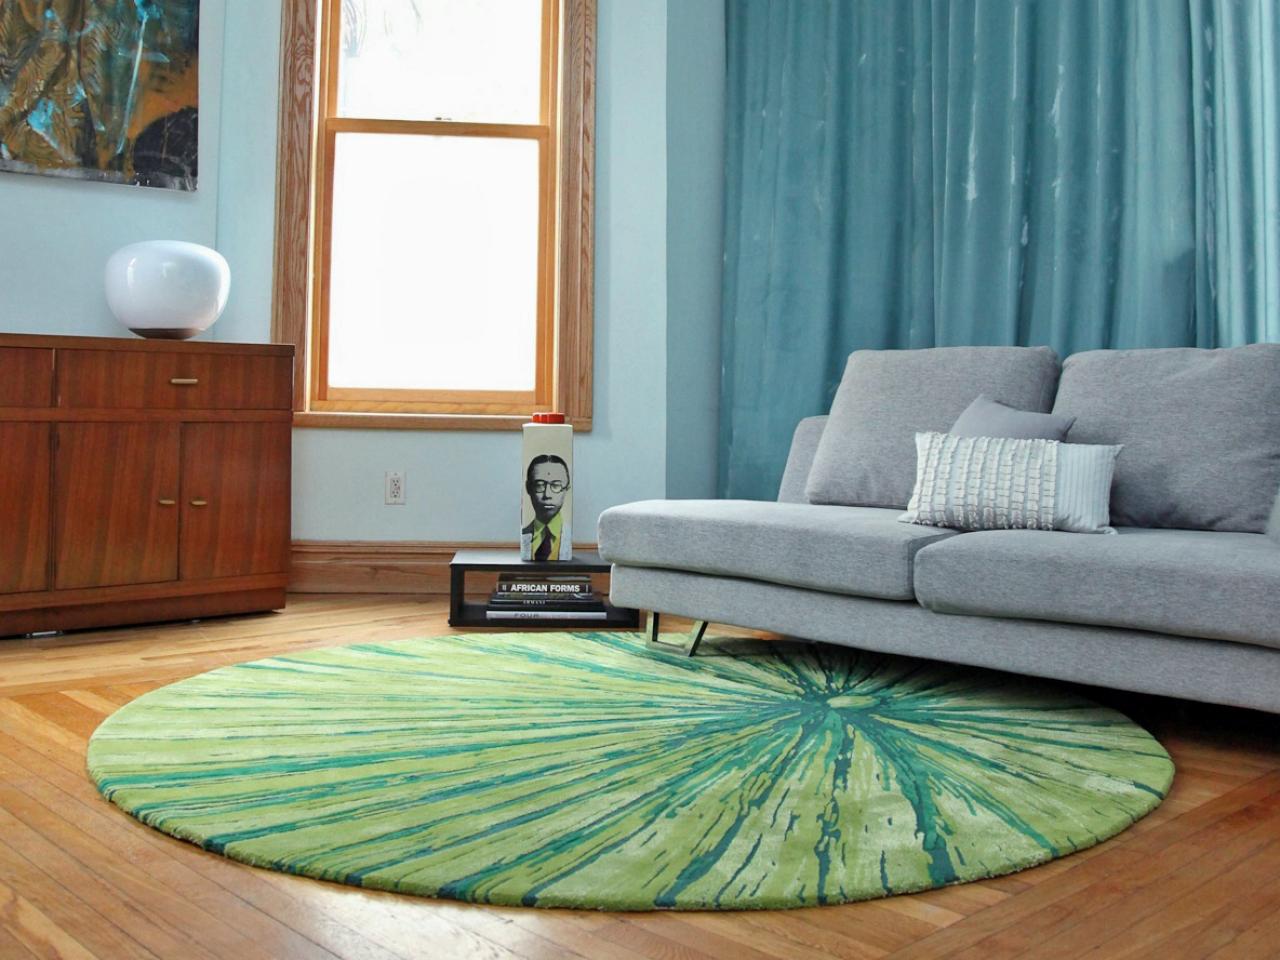 The use of carpets as one of the home decor items